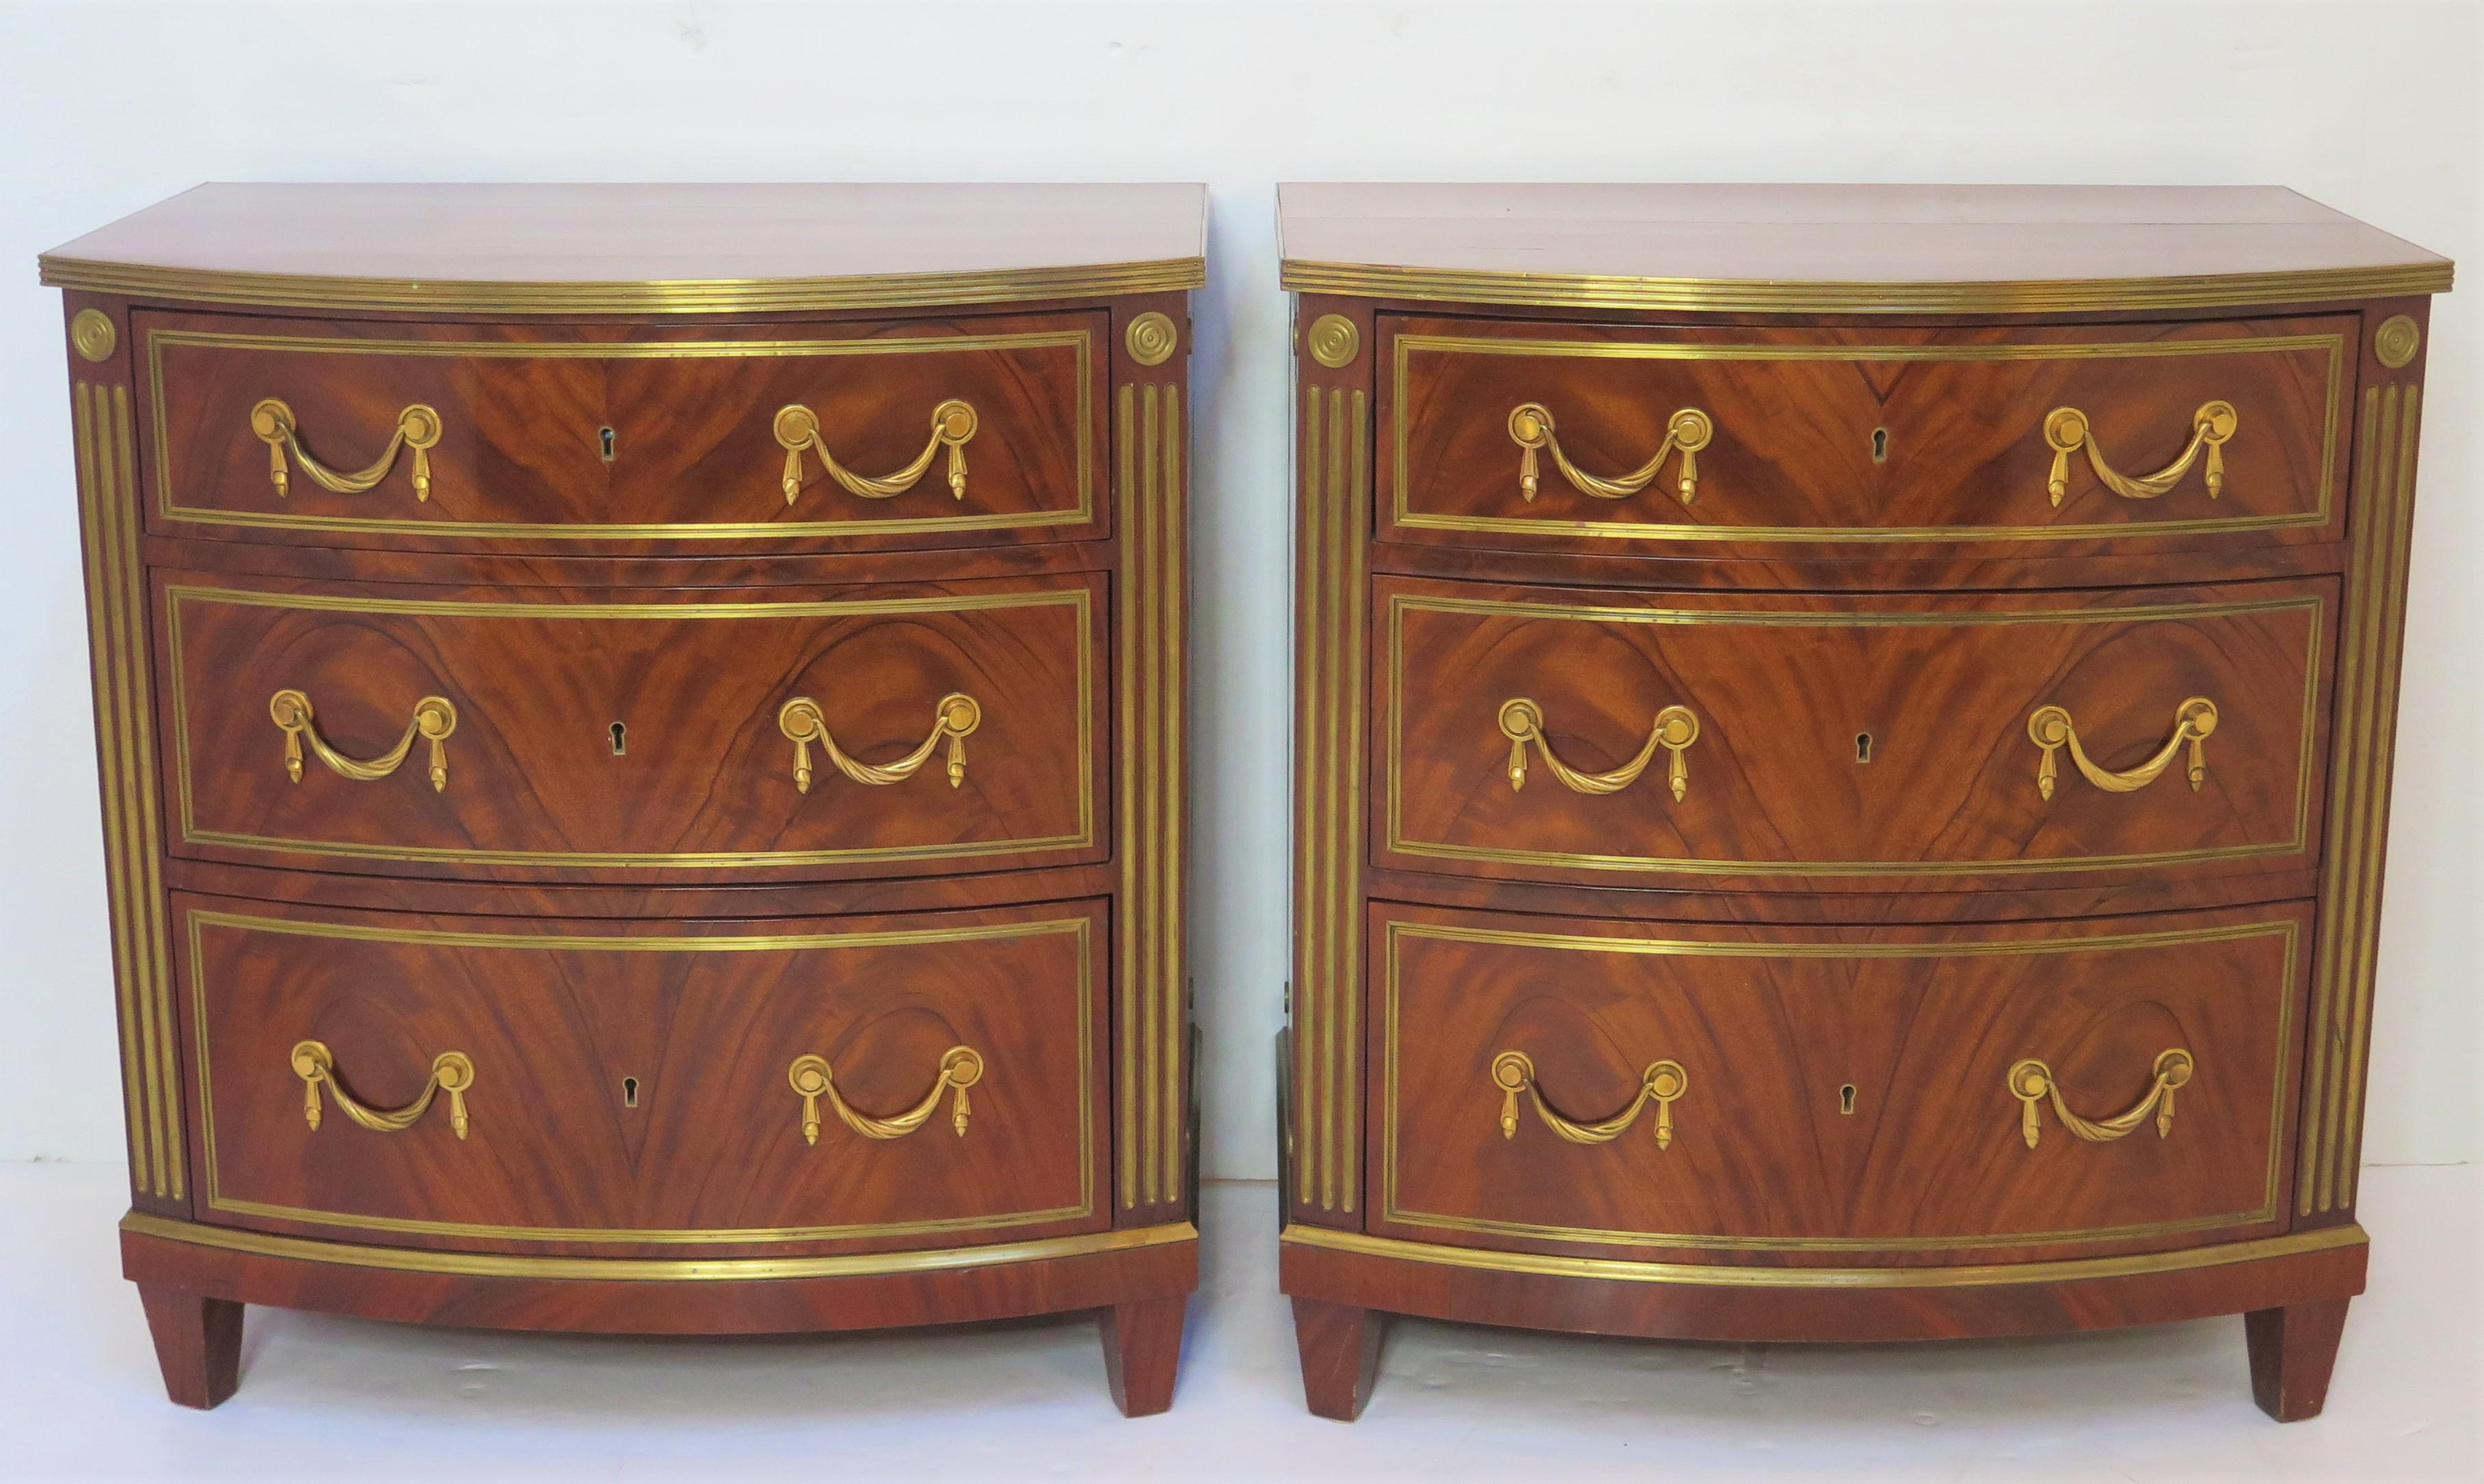 A pair of Russian Neoclassical gilt-brass mounted mahogany D-shaped / bow front chests of drawers, banded gilt brass inlaid frieze above three drawers with gilt brass swag bail pulls, note the beautiful book-matched crotch mahogany drawer fronts,